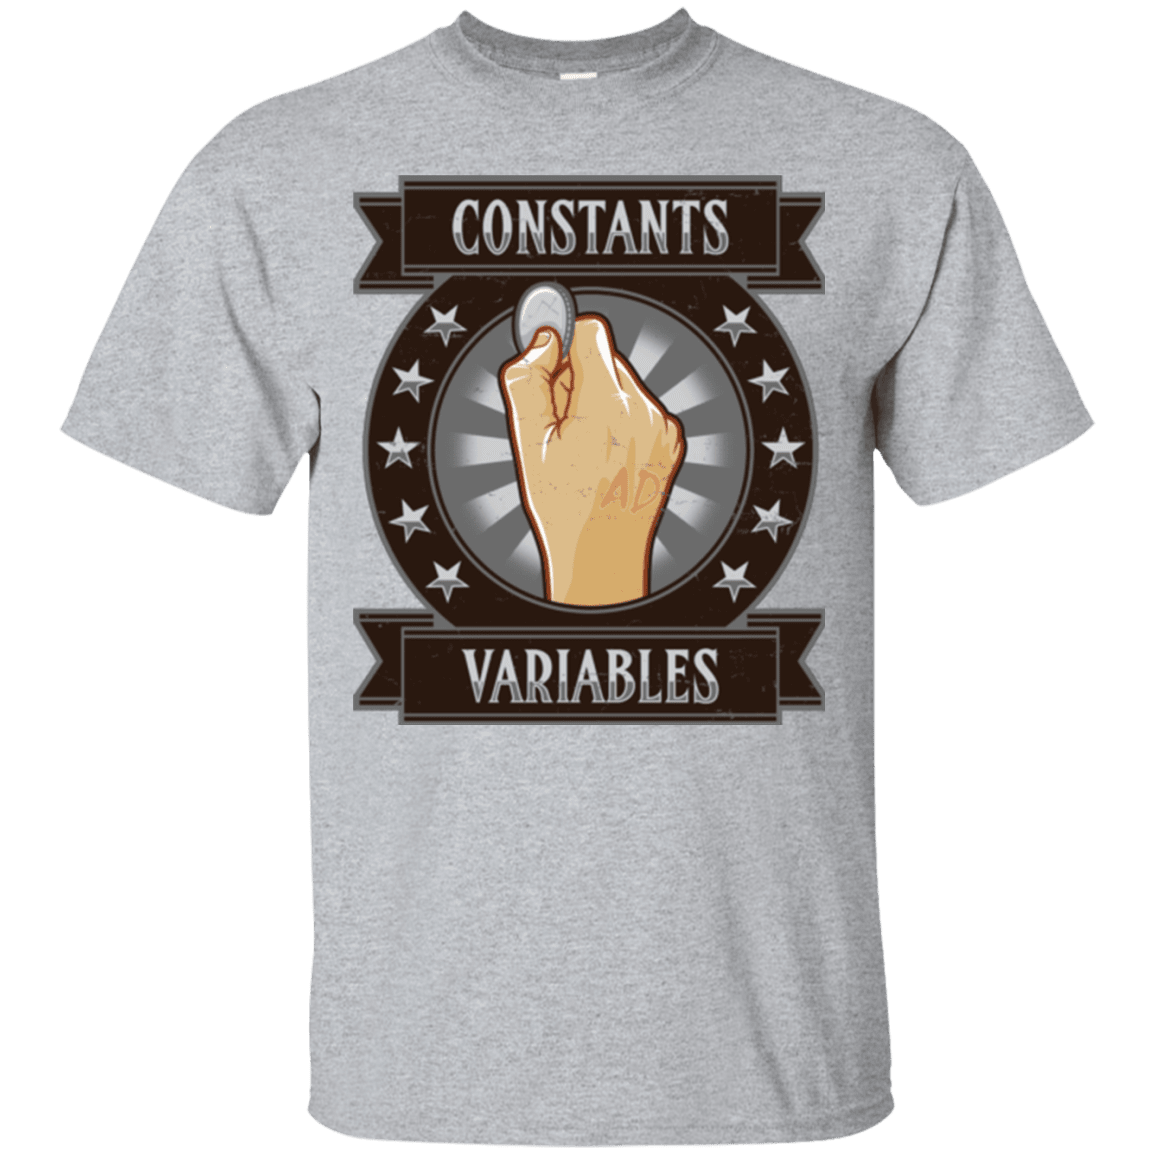 T-Shirts Sport Grey / Small CONSTANTS AND VARIABLES T-Shirt